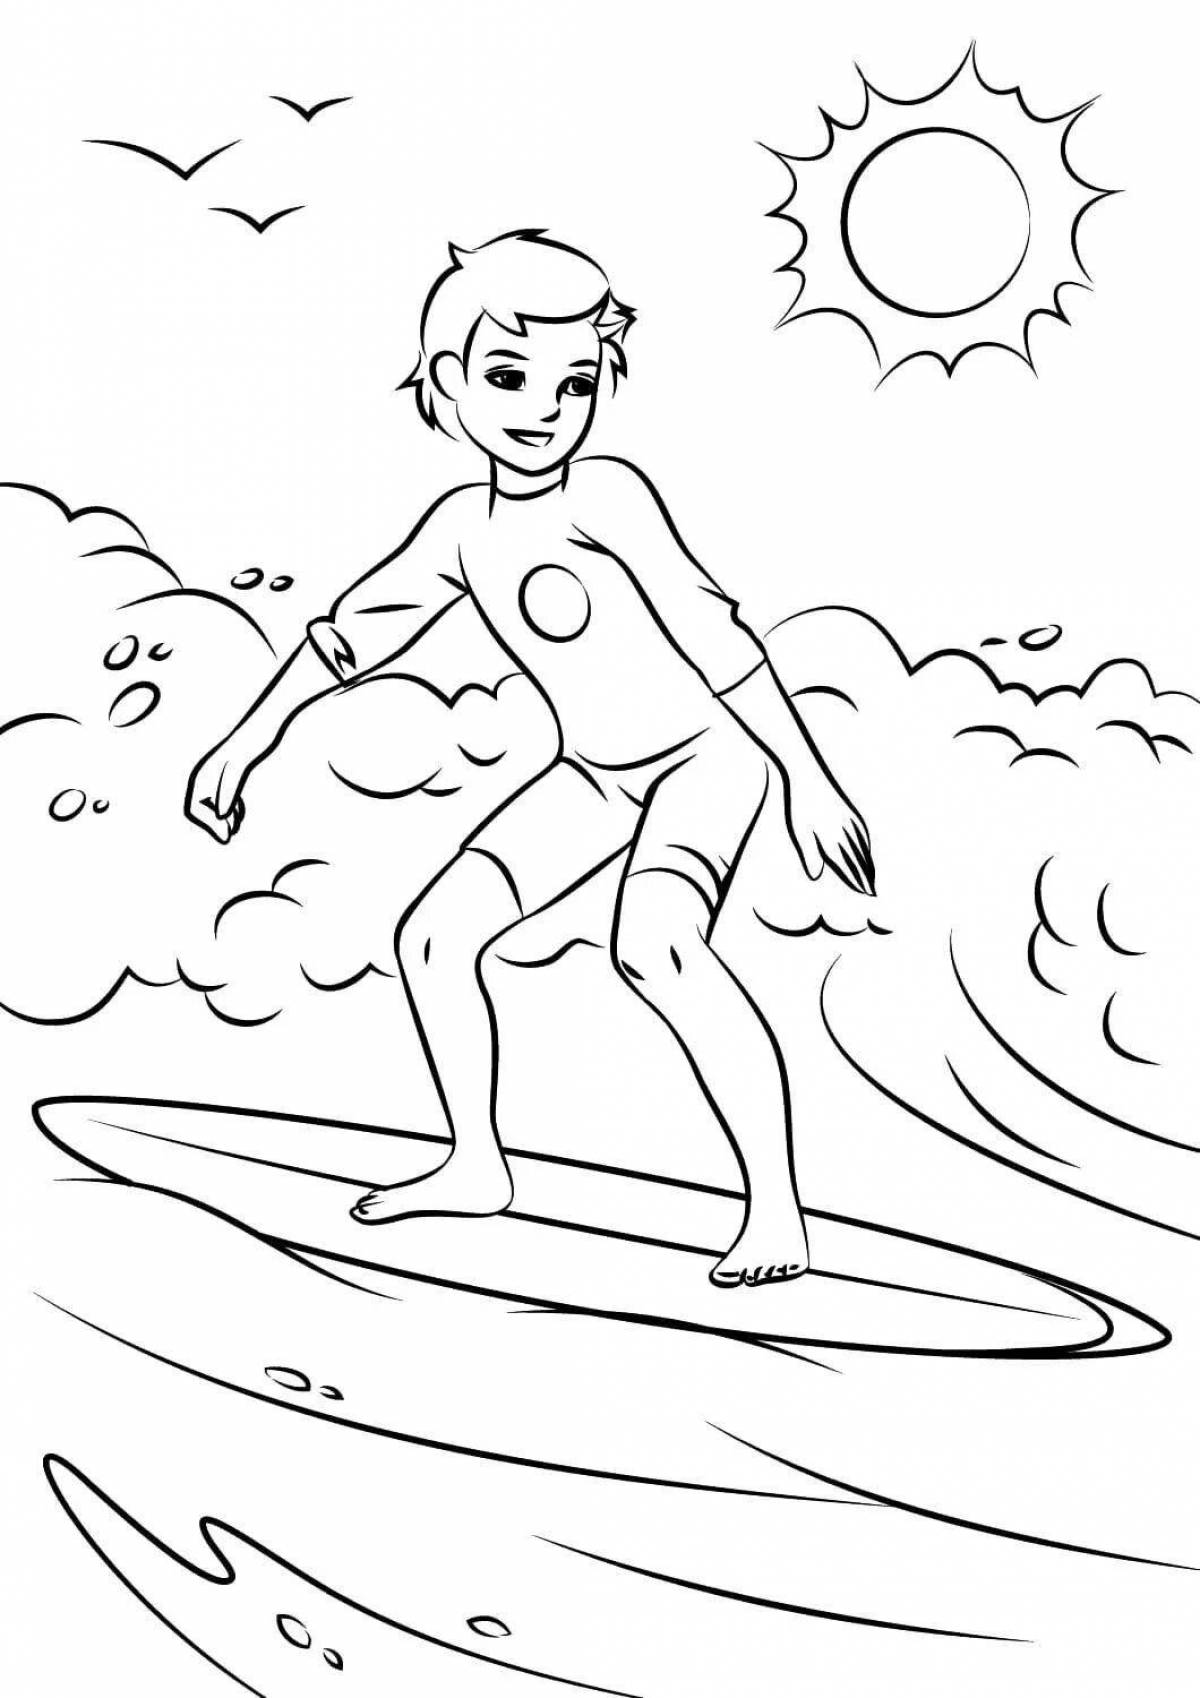 Great surf coloring page